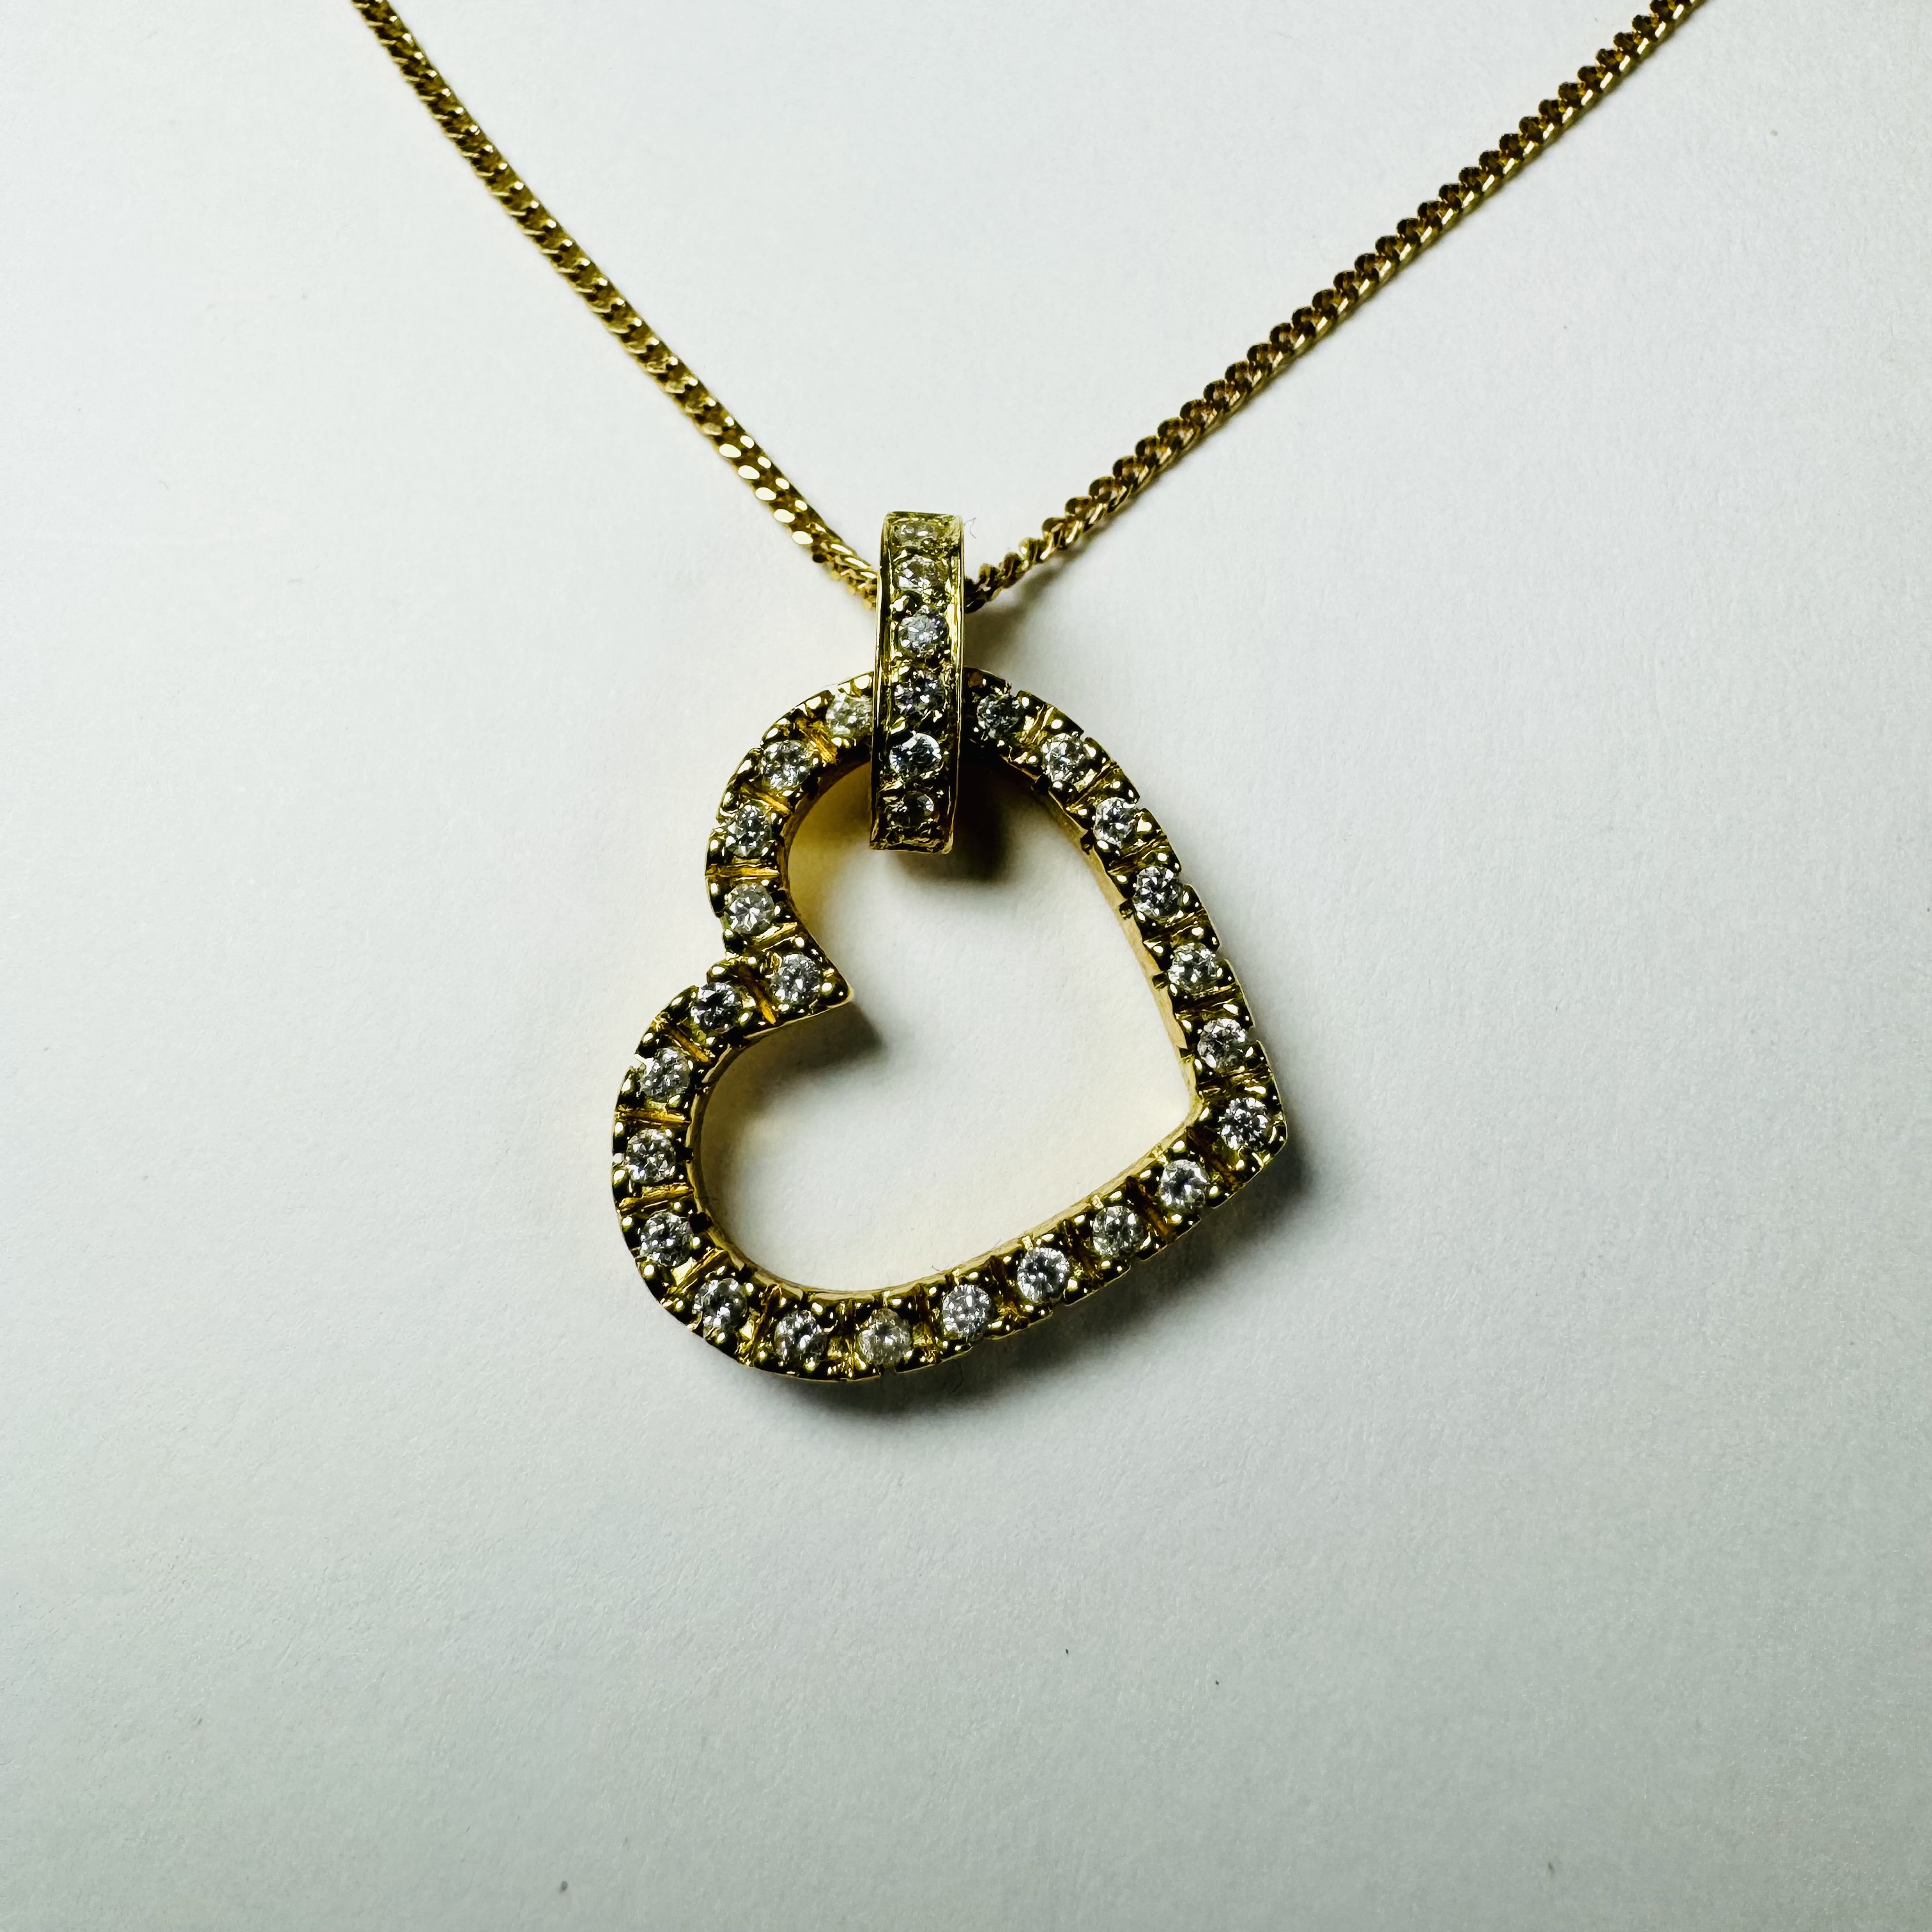 An 18ct gold diamond heart pendant on an 18ct gold chain. Set with 31 1.3mm round brilliant cut